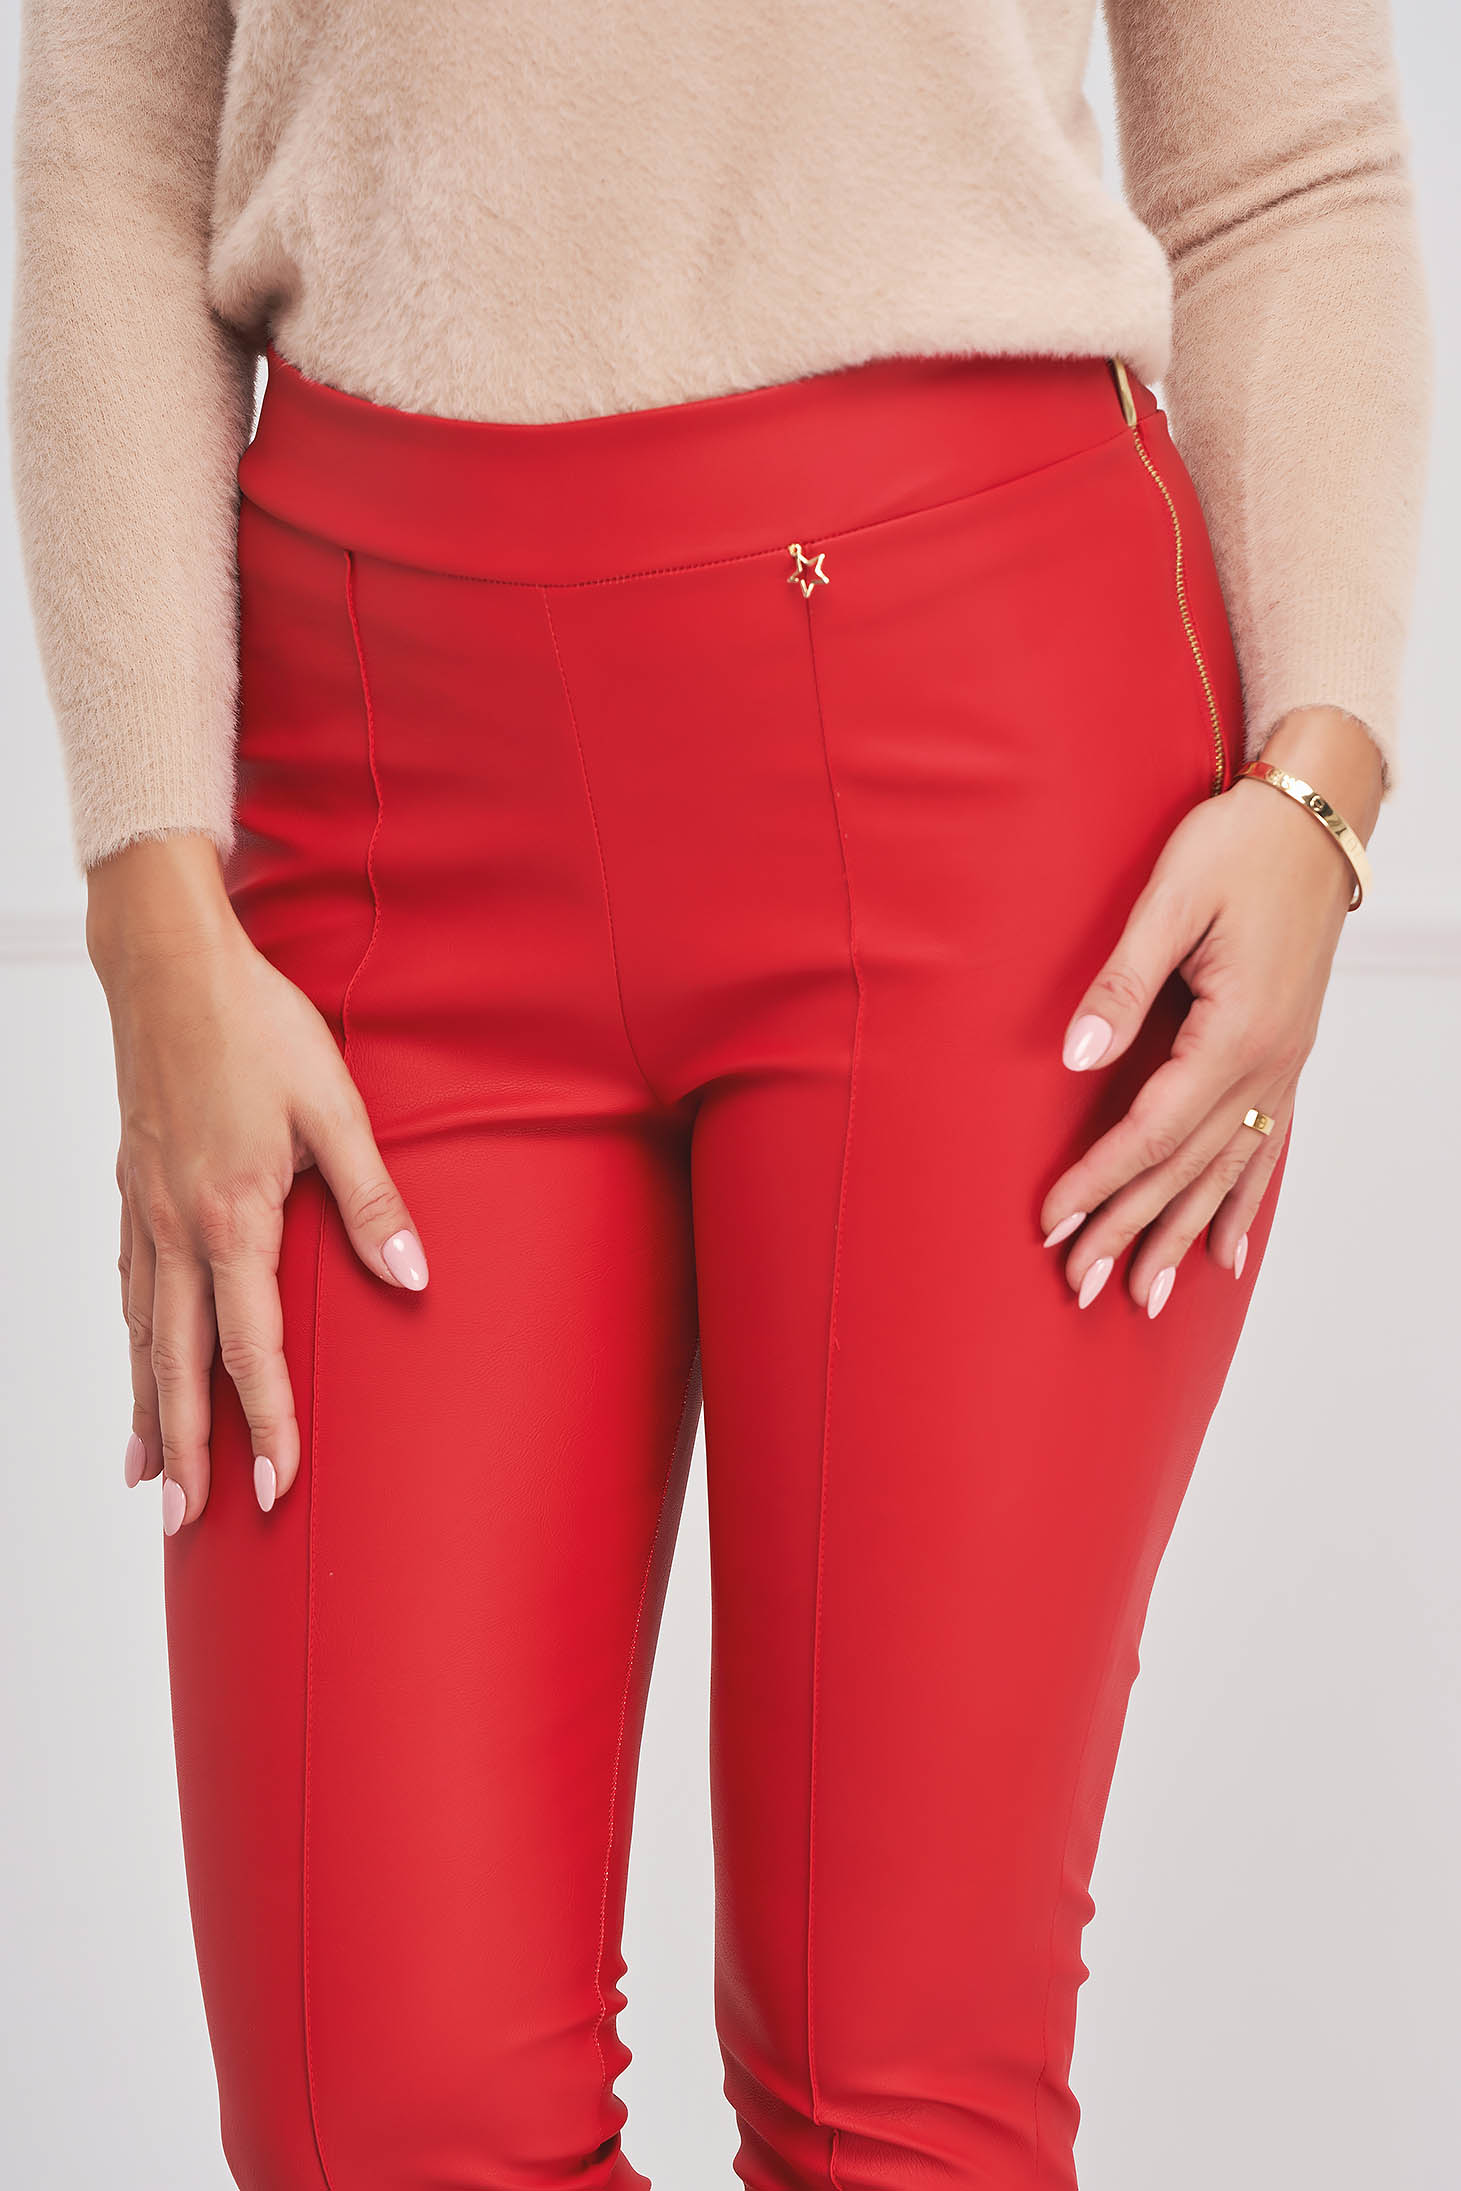 Red Faux Leather Tapered High Waist Pants - StarShinerS 4 - StarShinerS.com